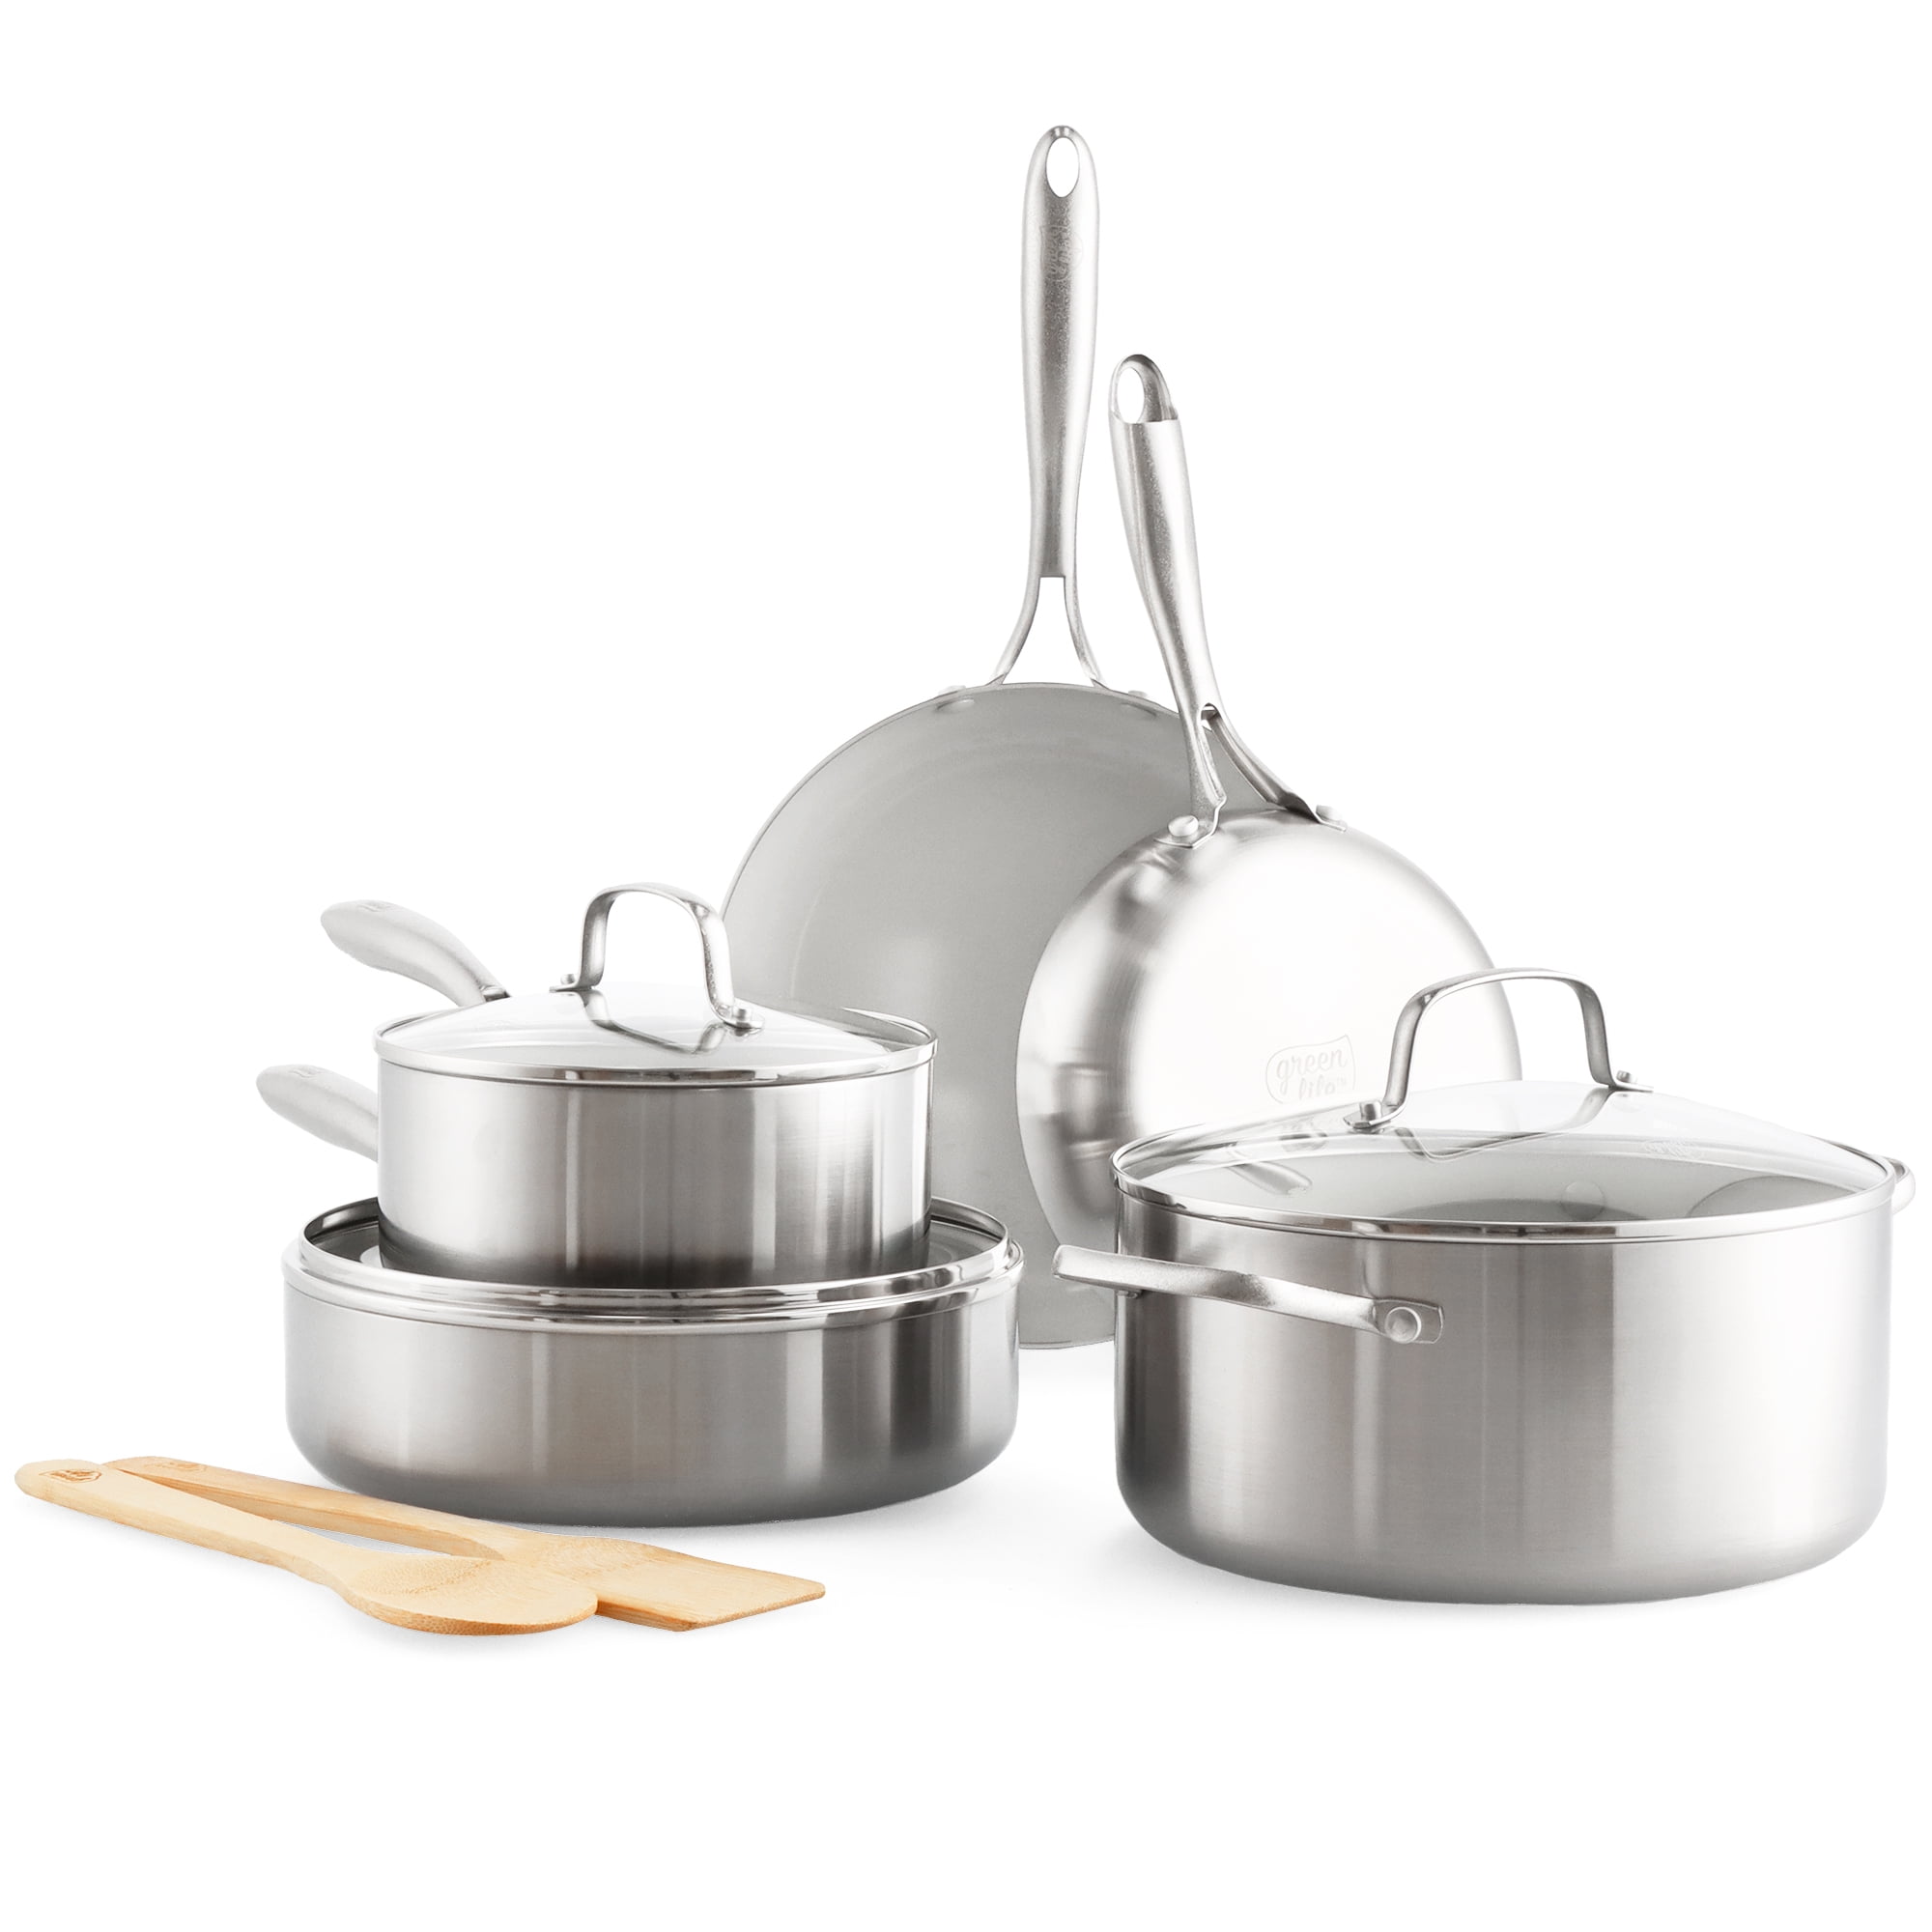 Lexi Home Diamond Tri-Ply 9 Piece Stainless Steel Nonstick Cookware Set, Silver